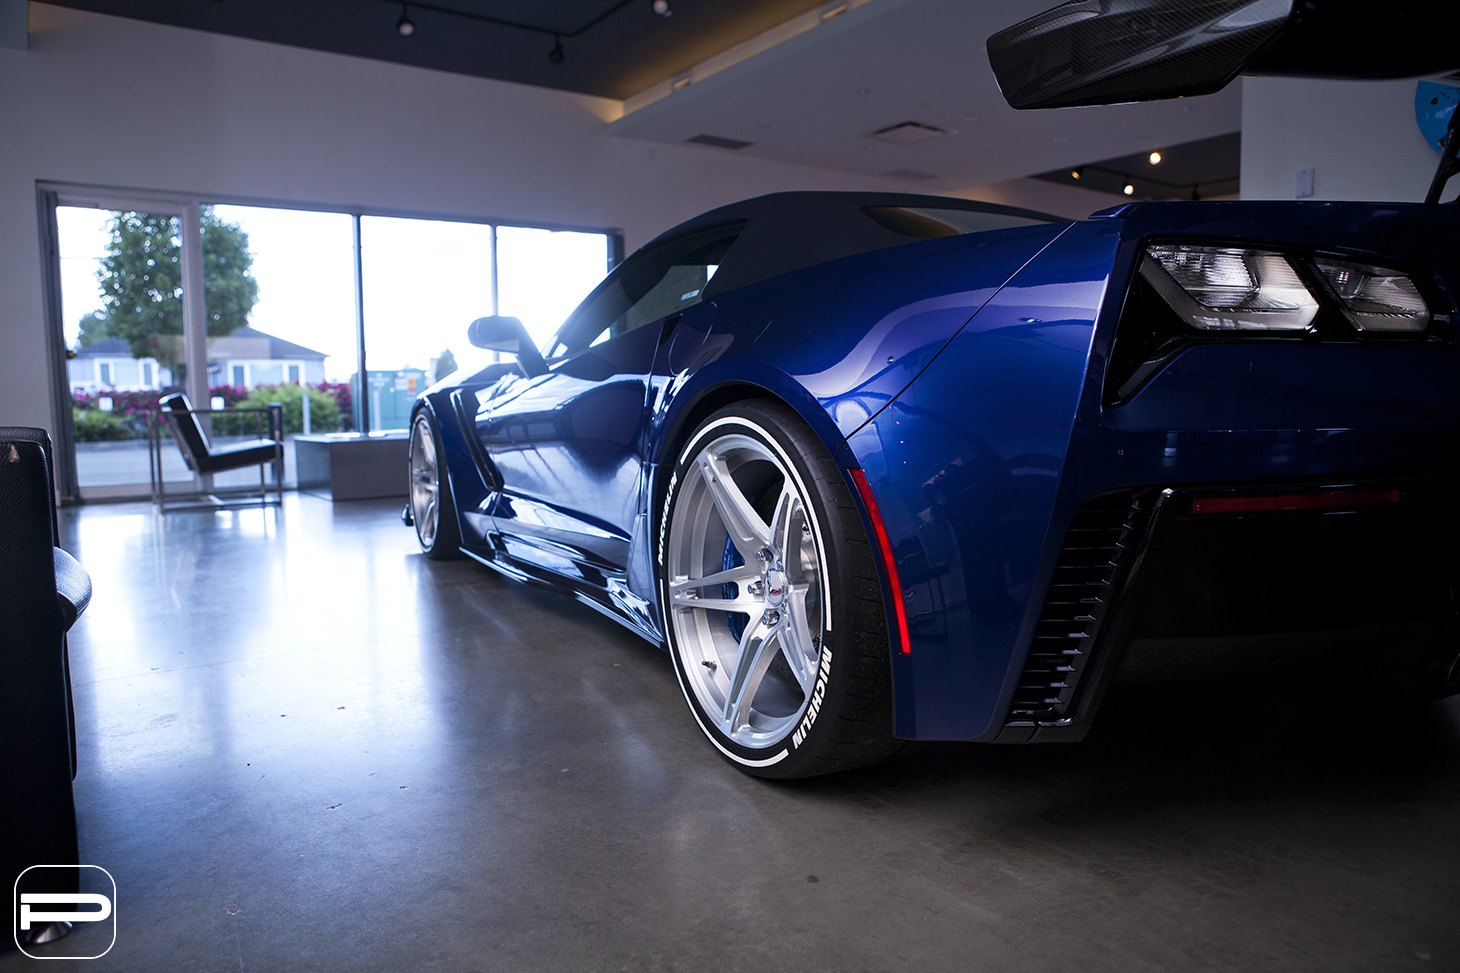 Large Sport Wing Spoiler on Blue Chevy Corvette - Photo by PUR Wheels